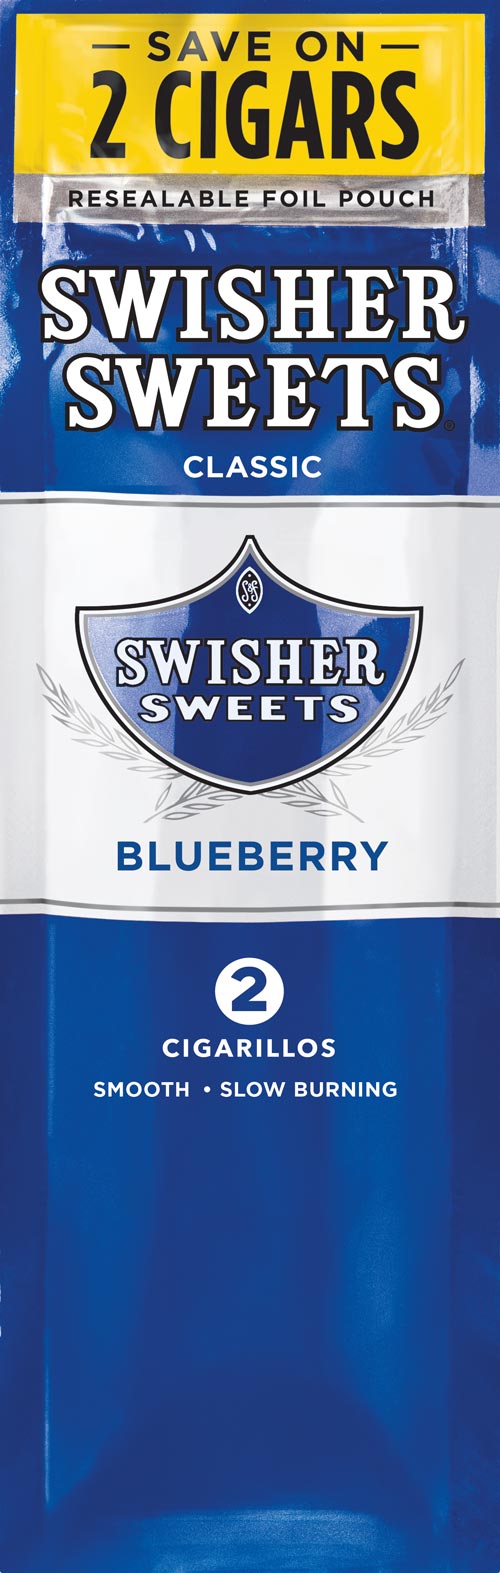 Swisher Sweets Cigarillos - Blueberry